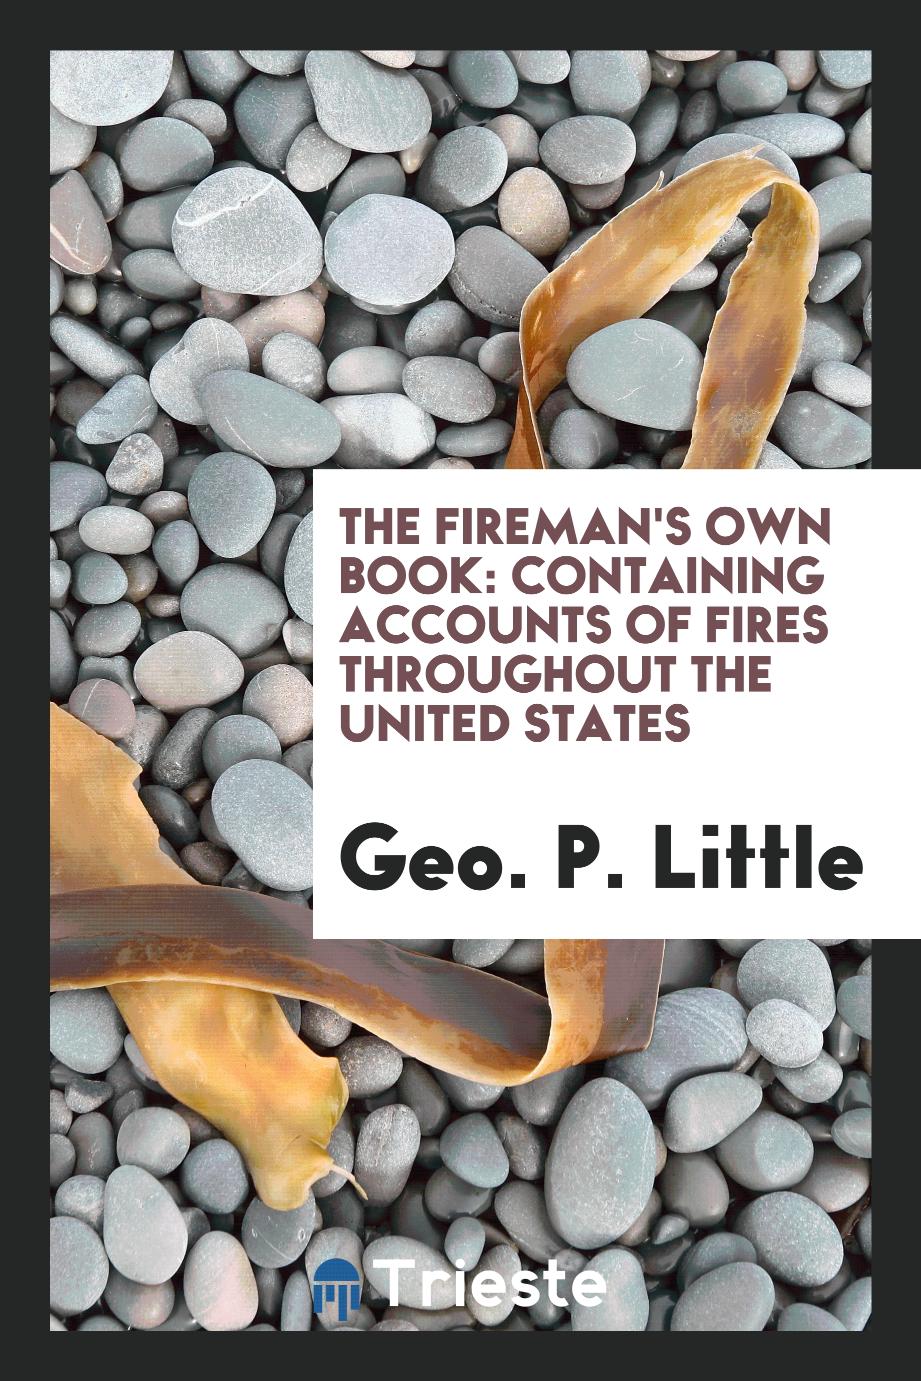 The Fireman's Own Book: Containing Accounts of Fires Throughout the United States